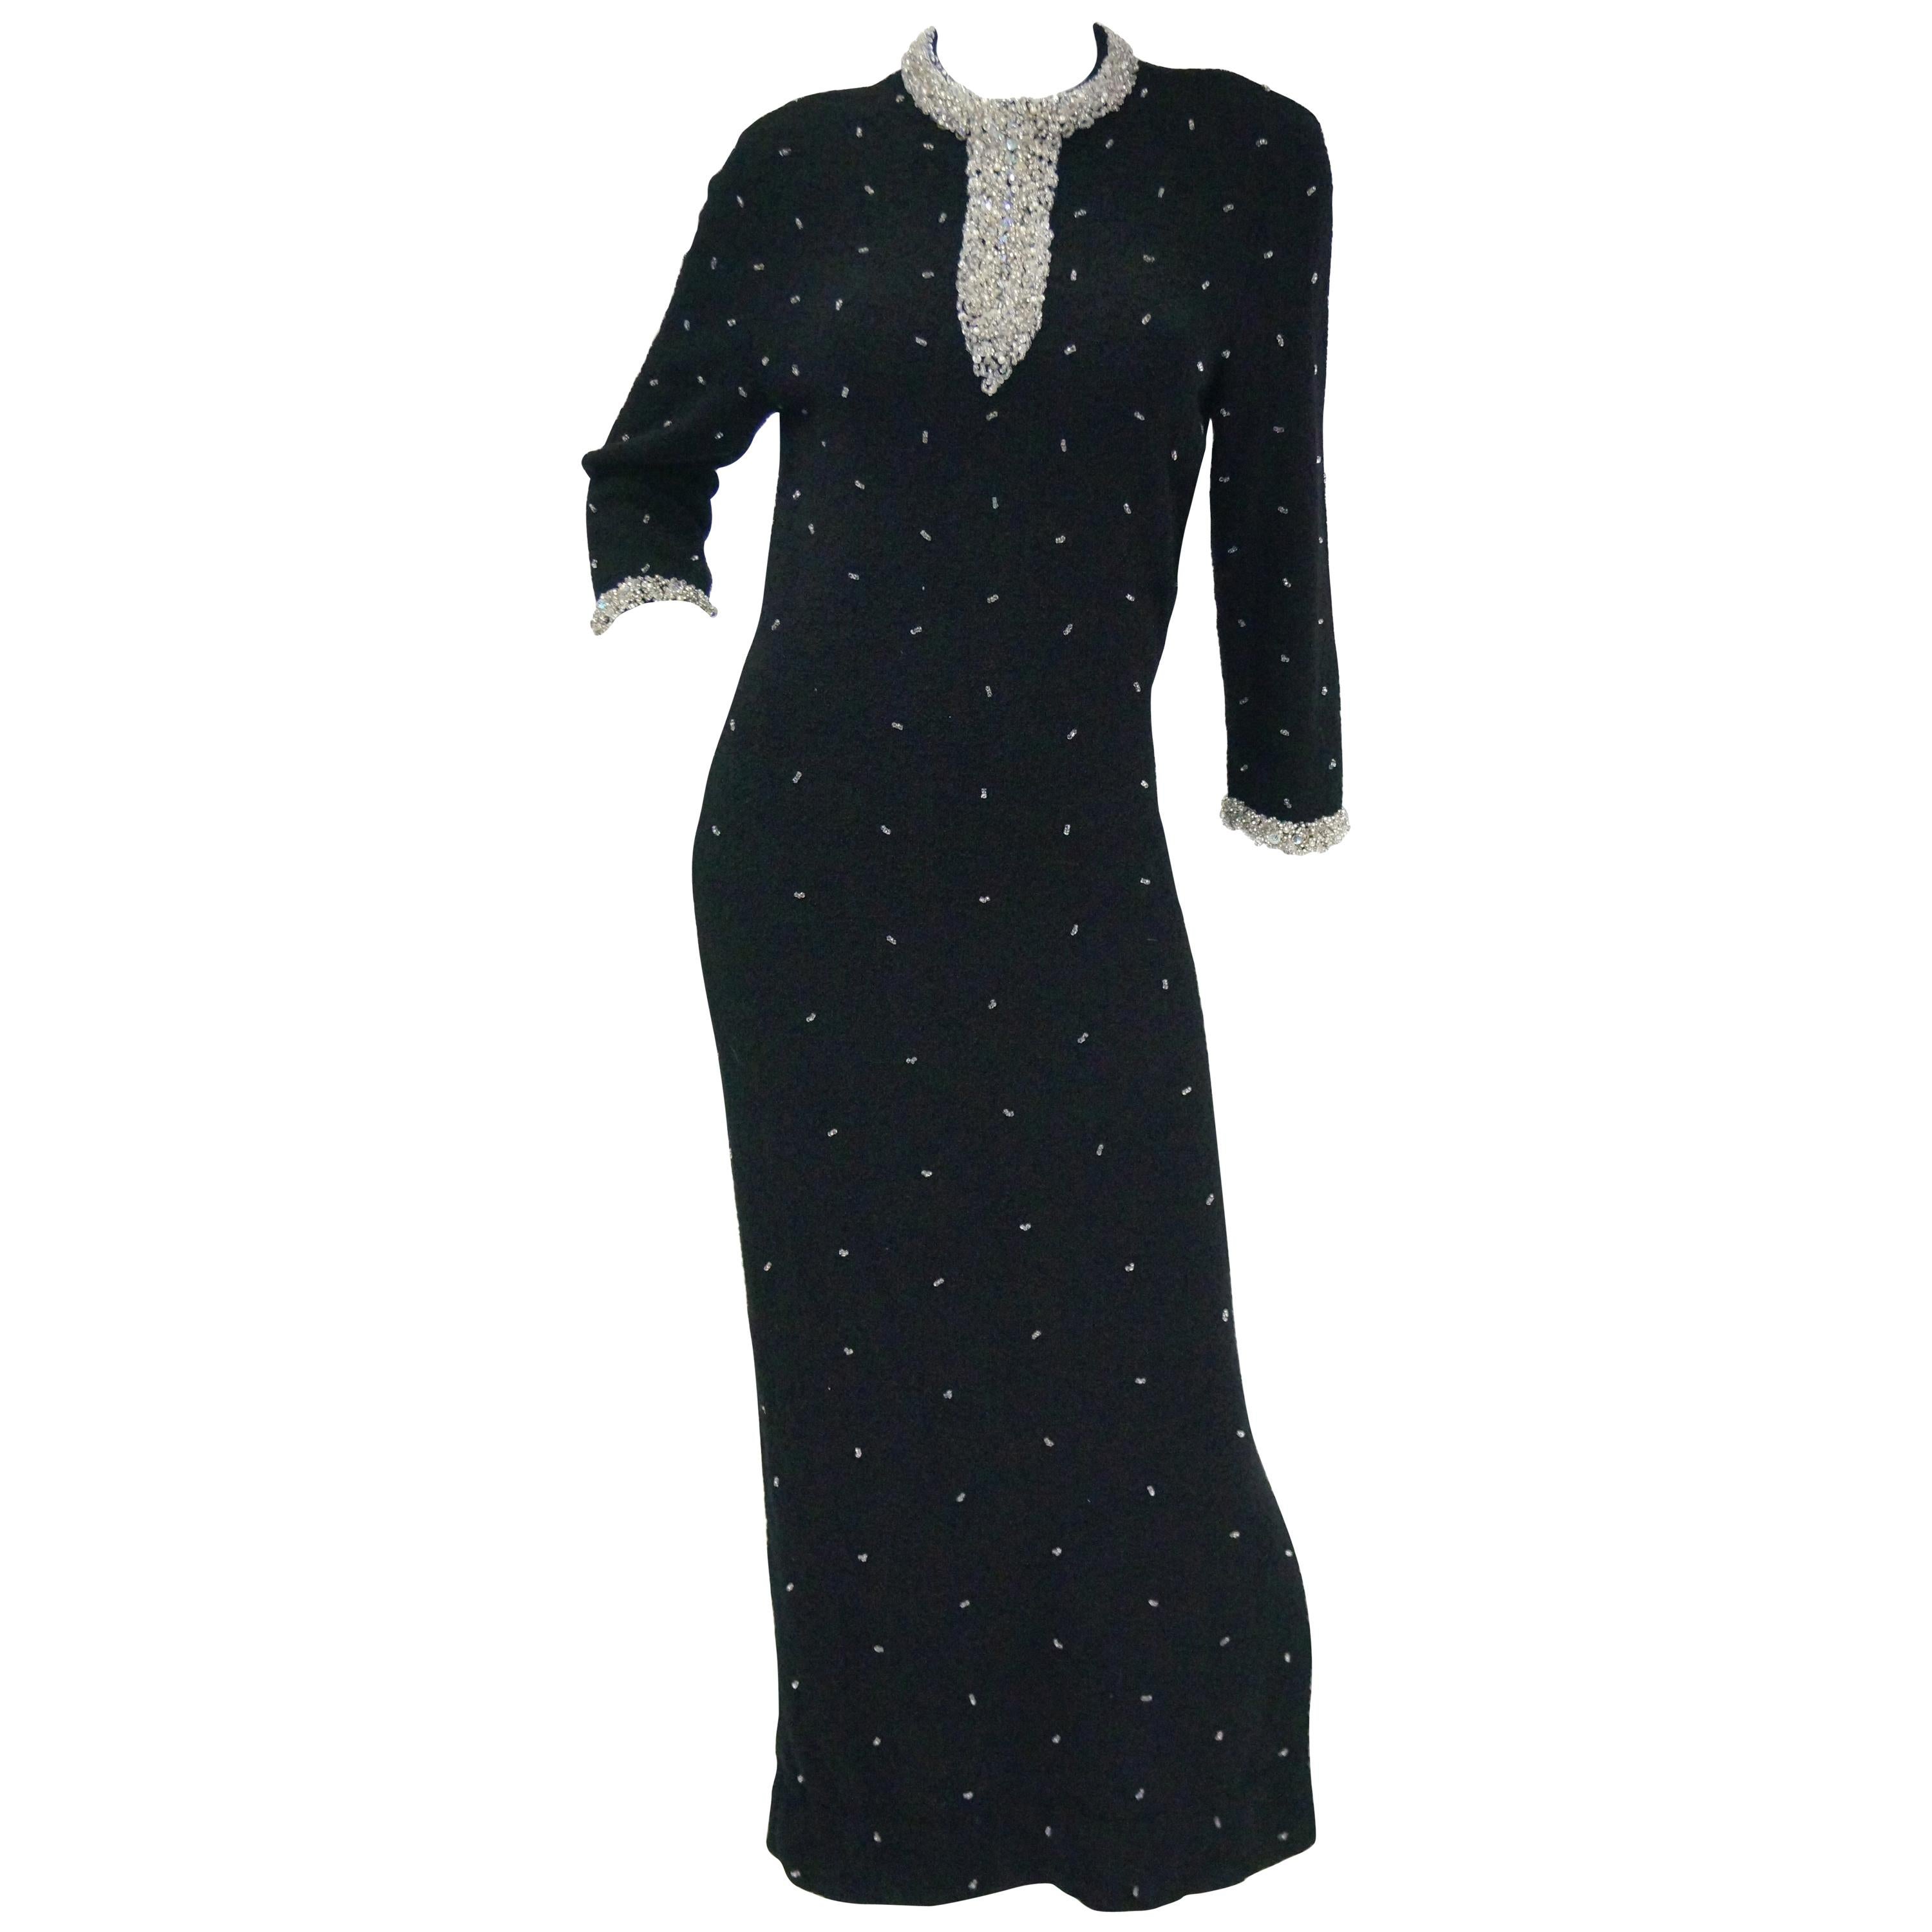 1960s Black Wool Knit Evening Dress Featuring Silver Glass Seed Bead Detail For Sale